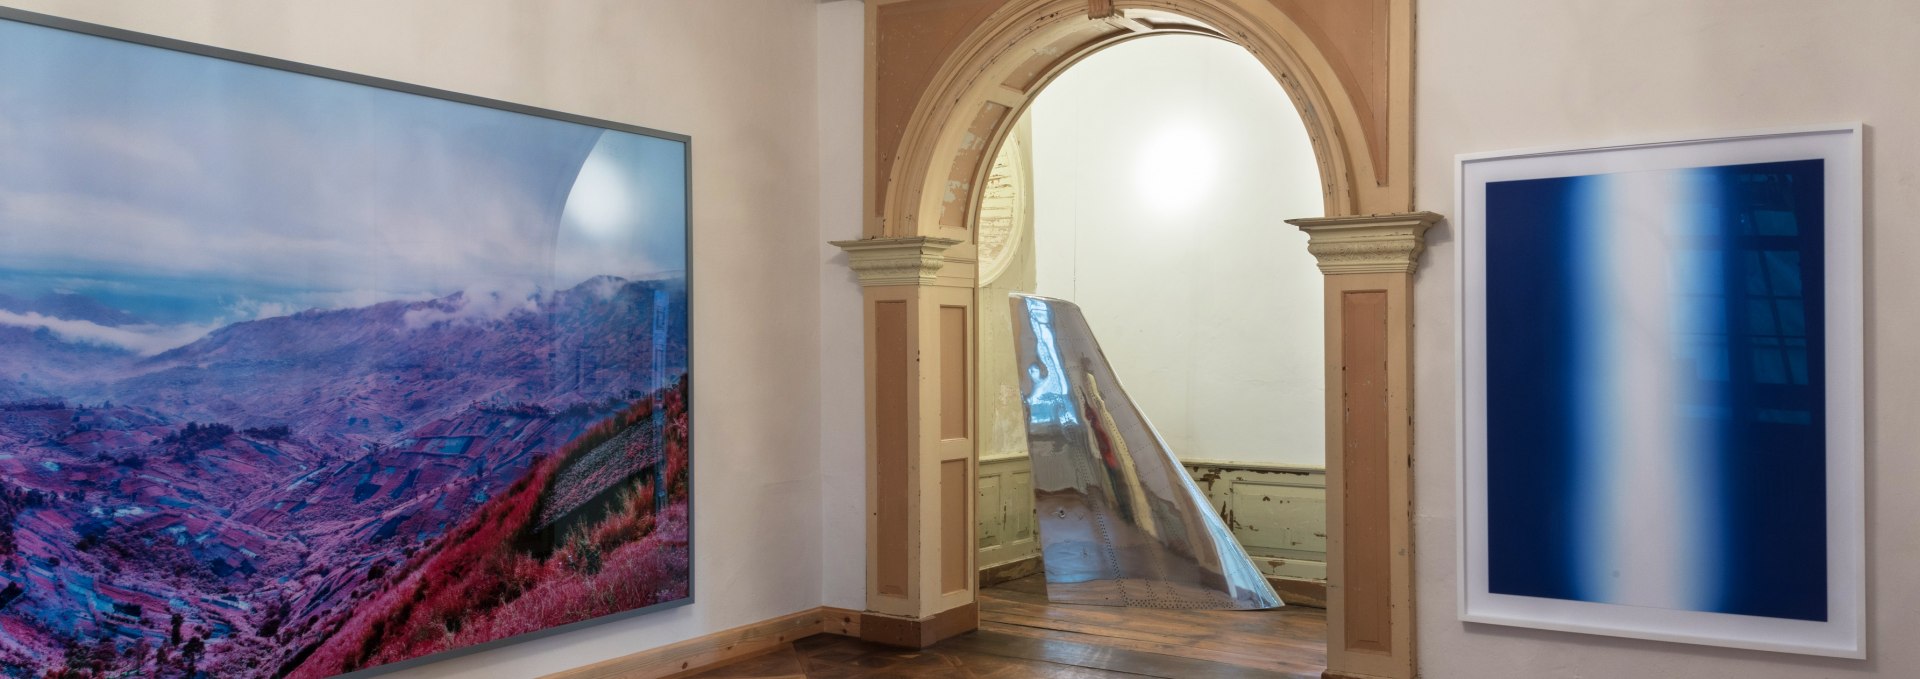 The Mosse Banner - Buetti in Kummerow Castle, © Thomas Wesely